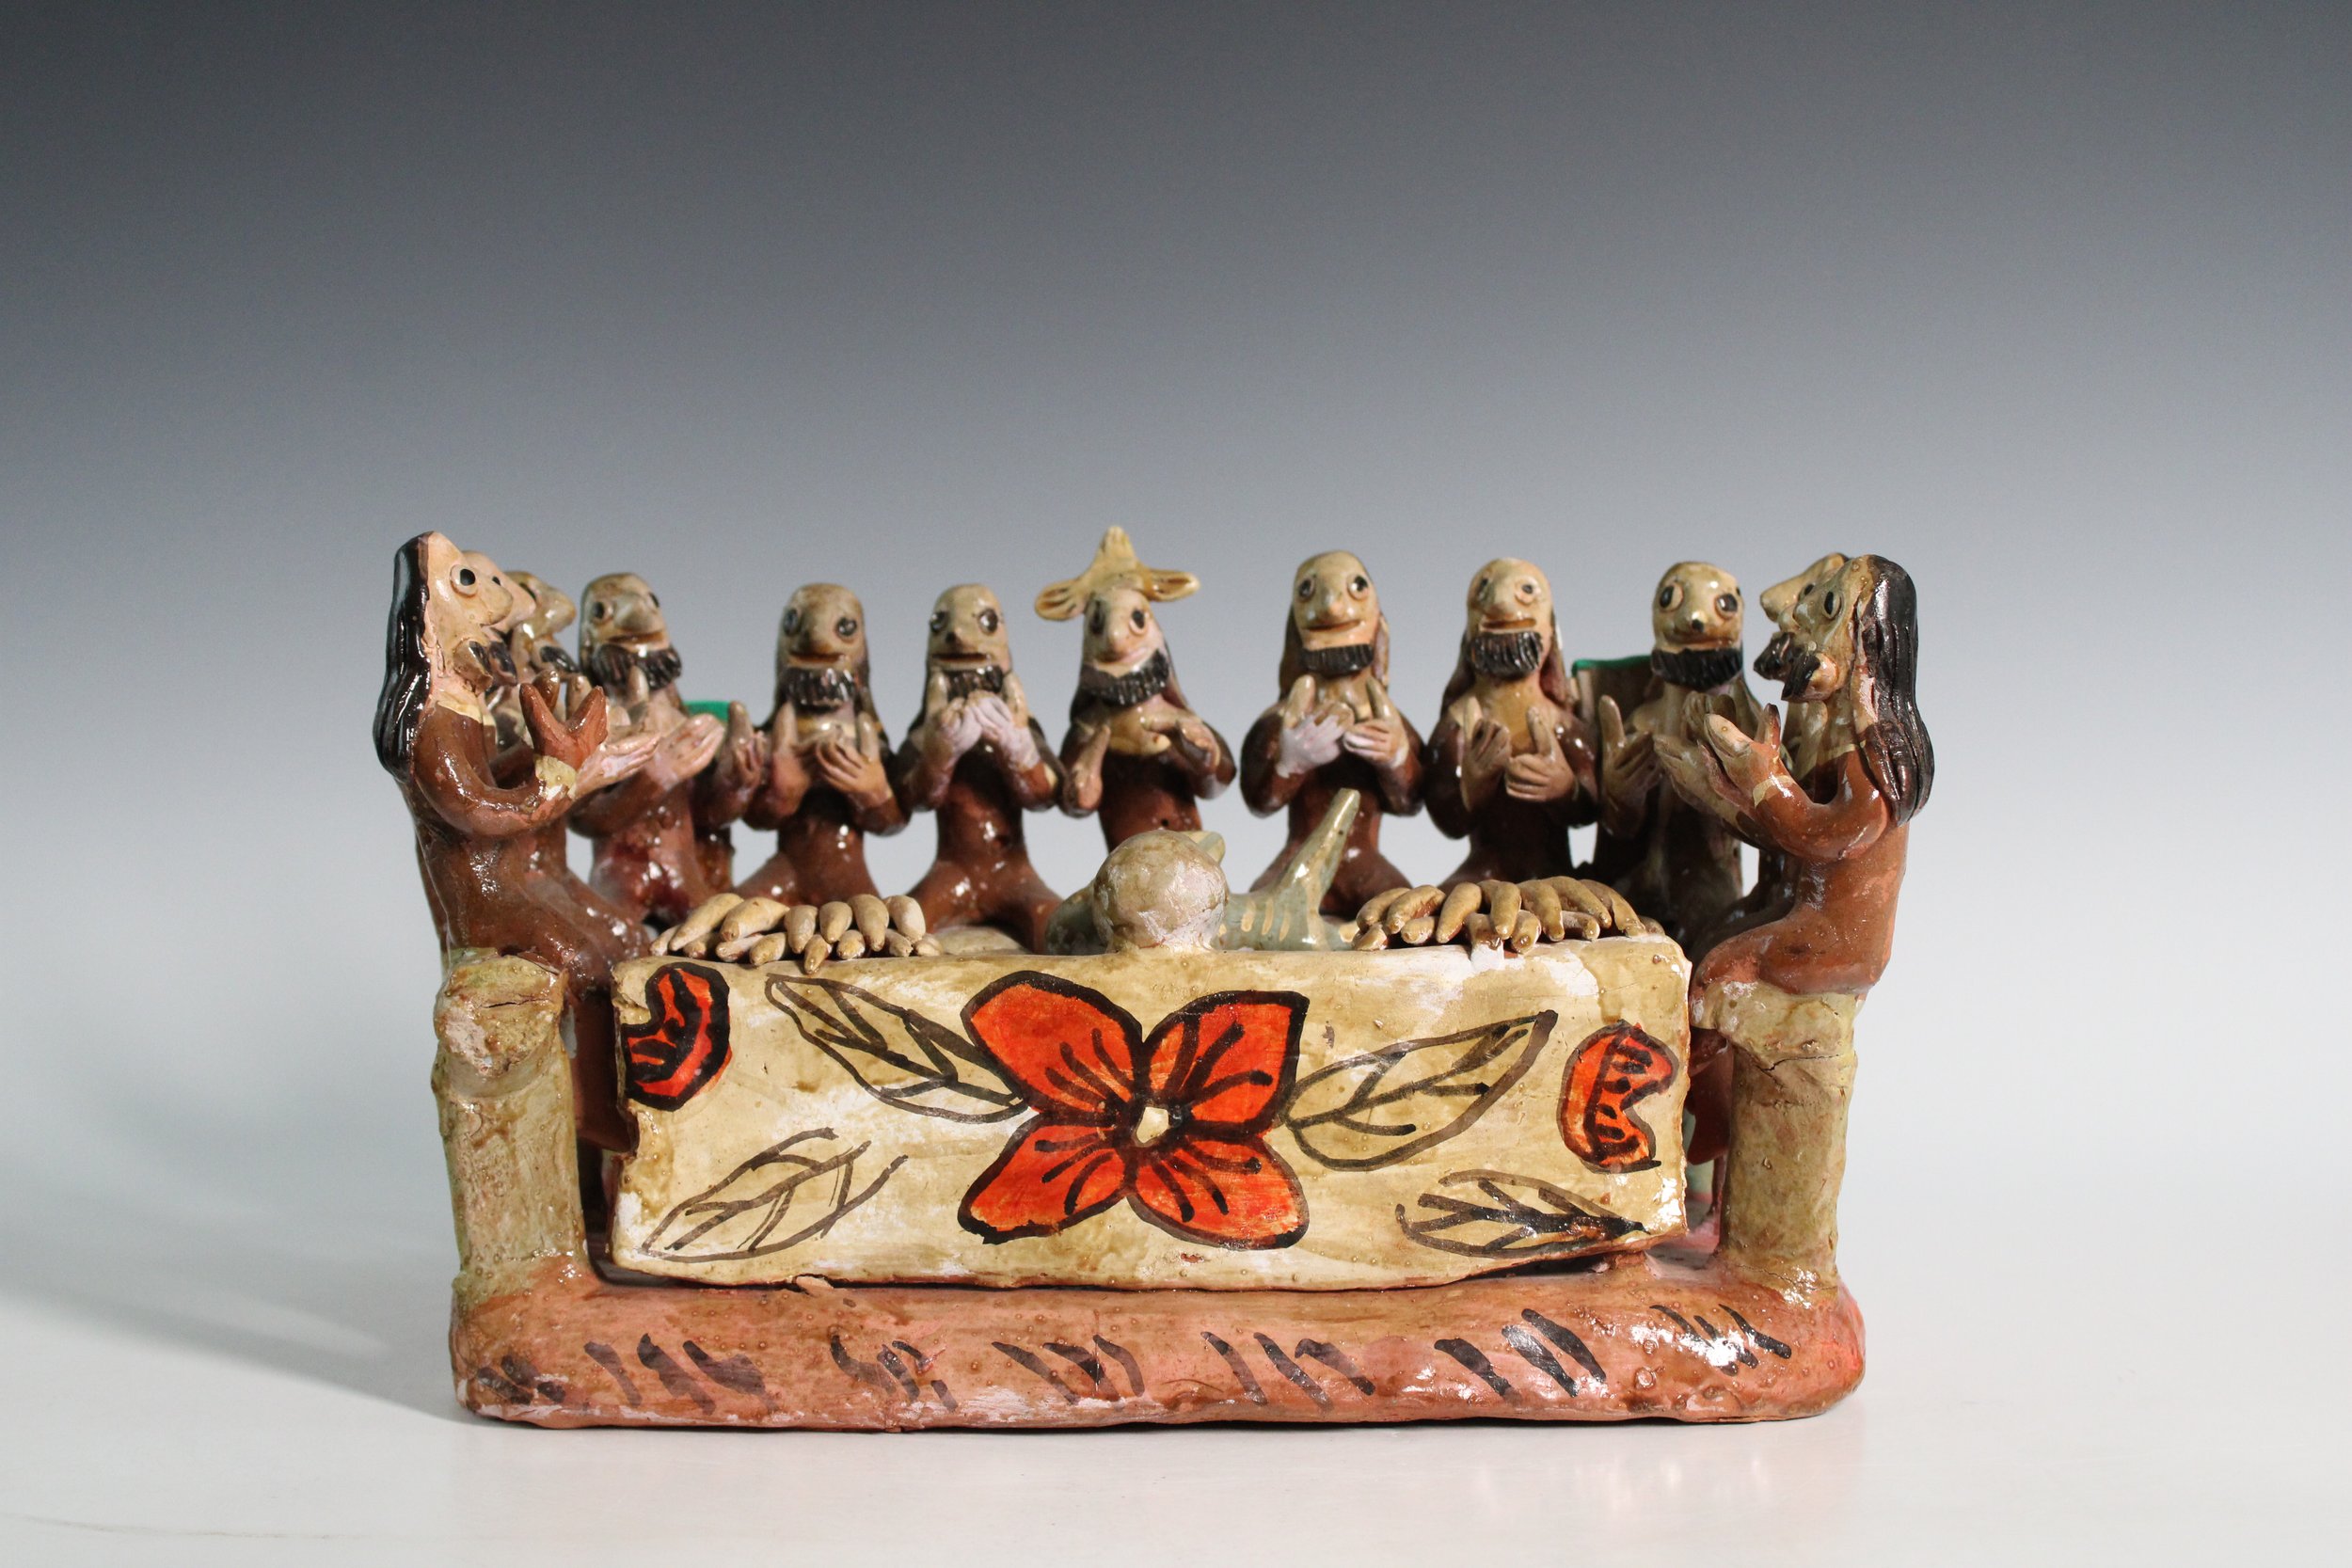 Mexican Folk Art Polychrome Earthenware Sculpture Depicting the Last Supper, 20th Century